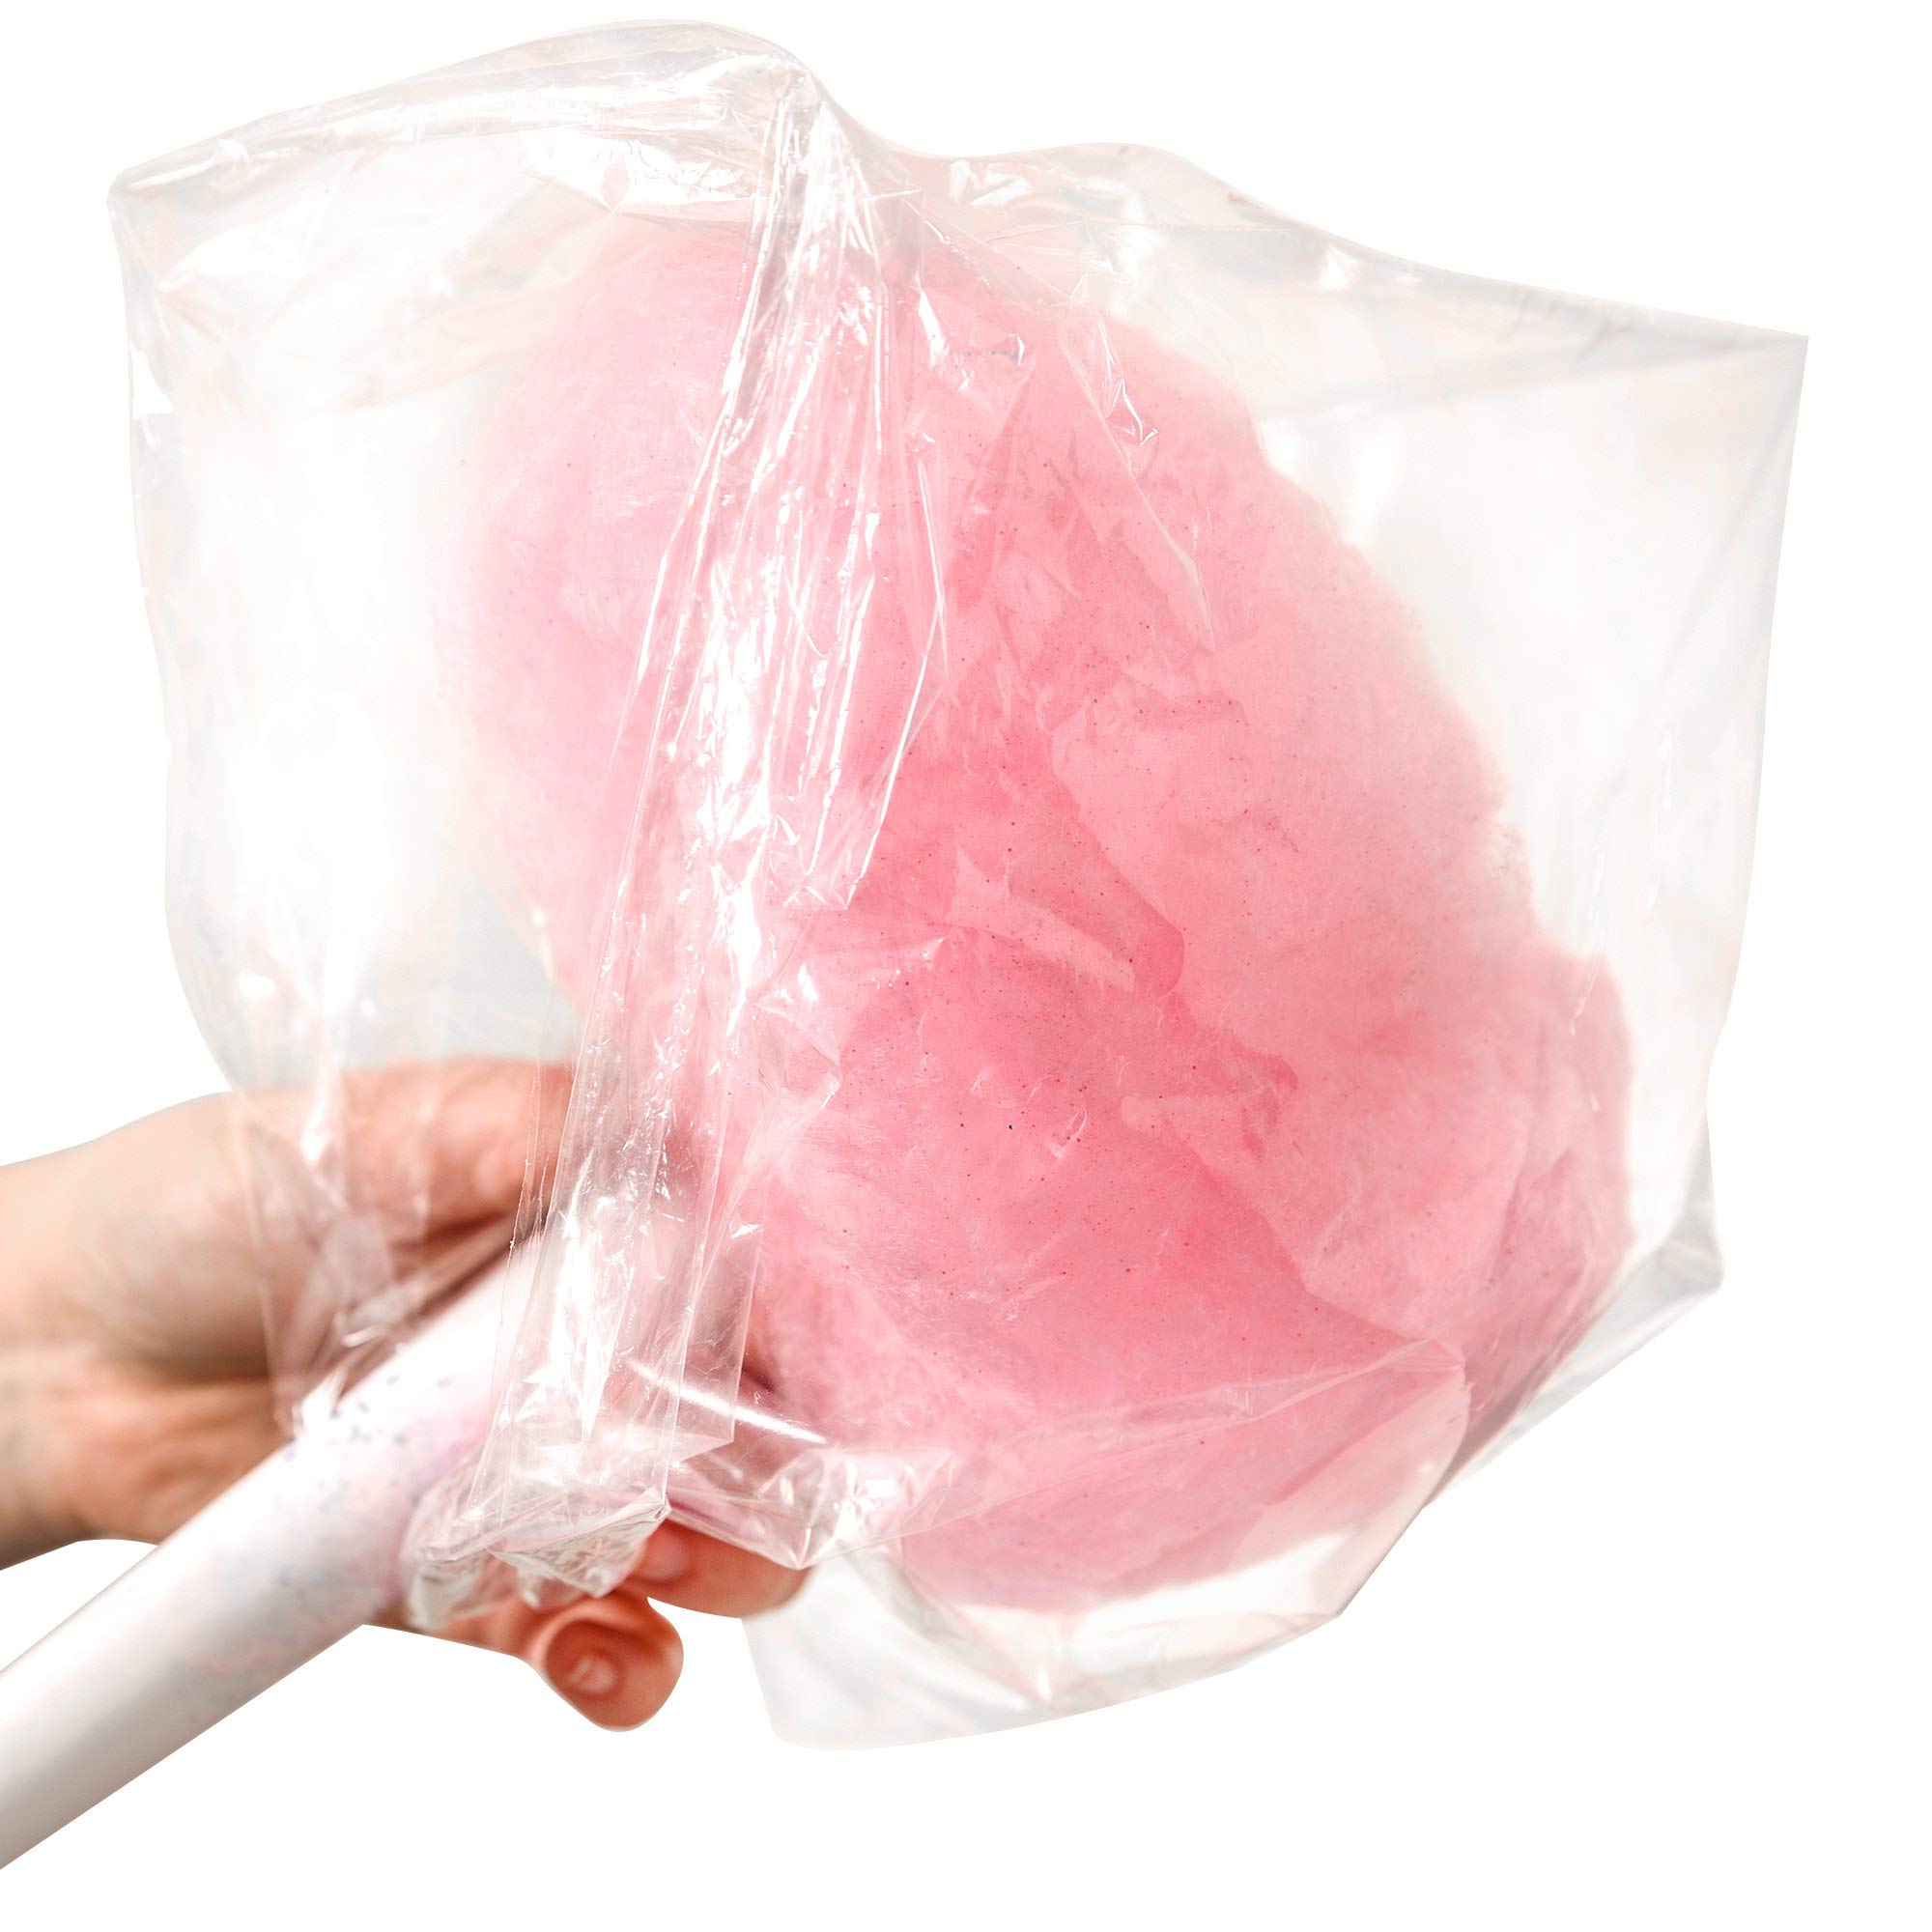 Concession Essentials - CE Floss Sugar -2pk Cotton Candy Floss Sugar 2 Pack (Pink Vanilla and Blue Raspberry) & Nostalgia Cotton Candy Party Kit, 3 Flavors, 4 Reusable Cones, 10 Floss Bags